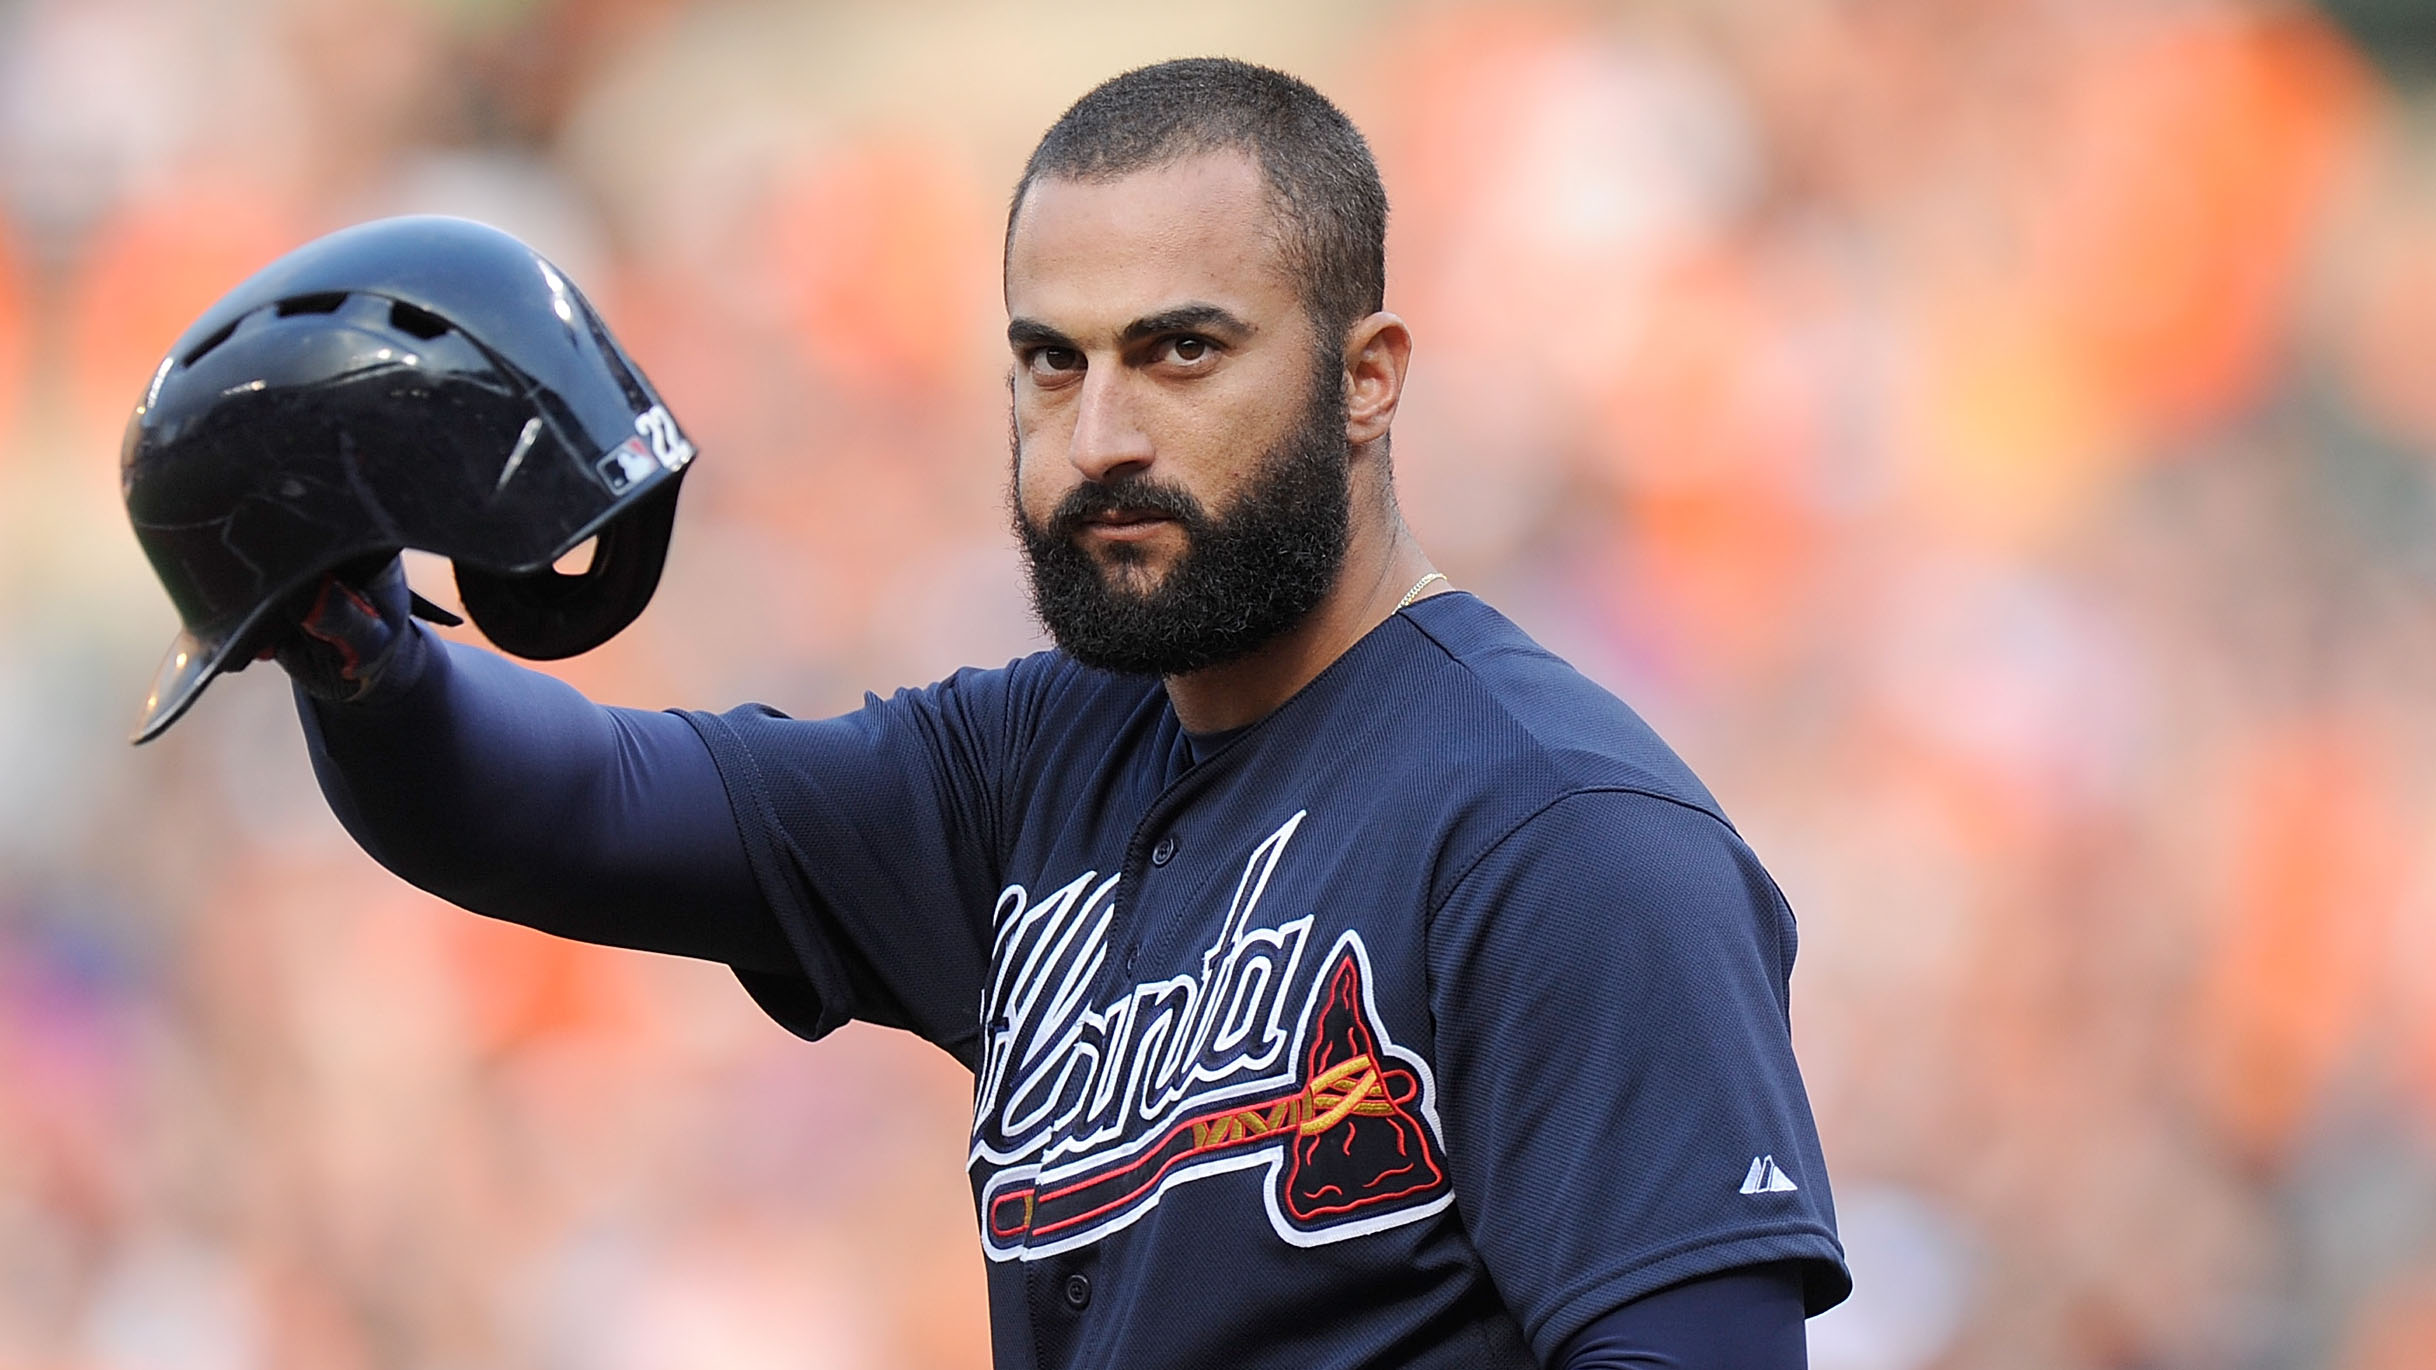 The Best of Nick Markakis